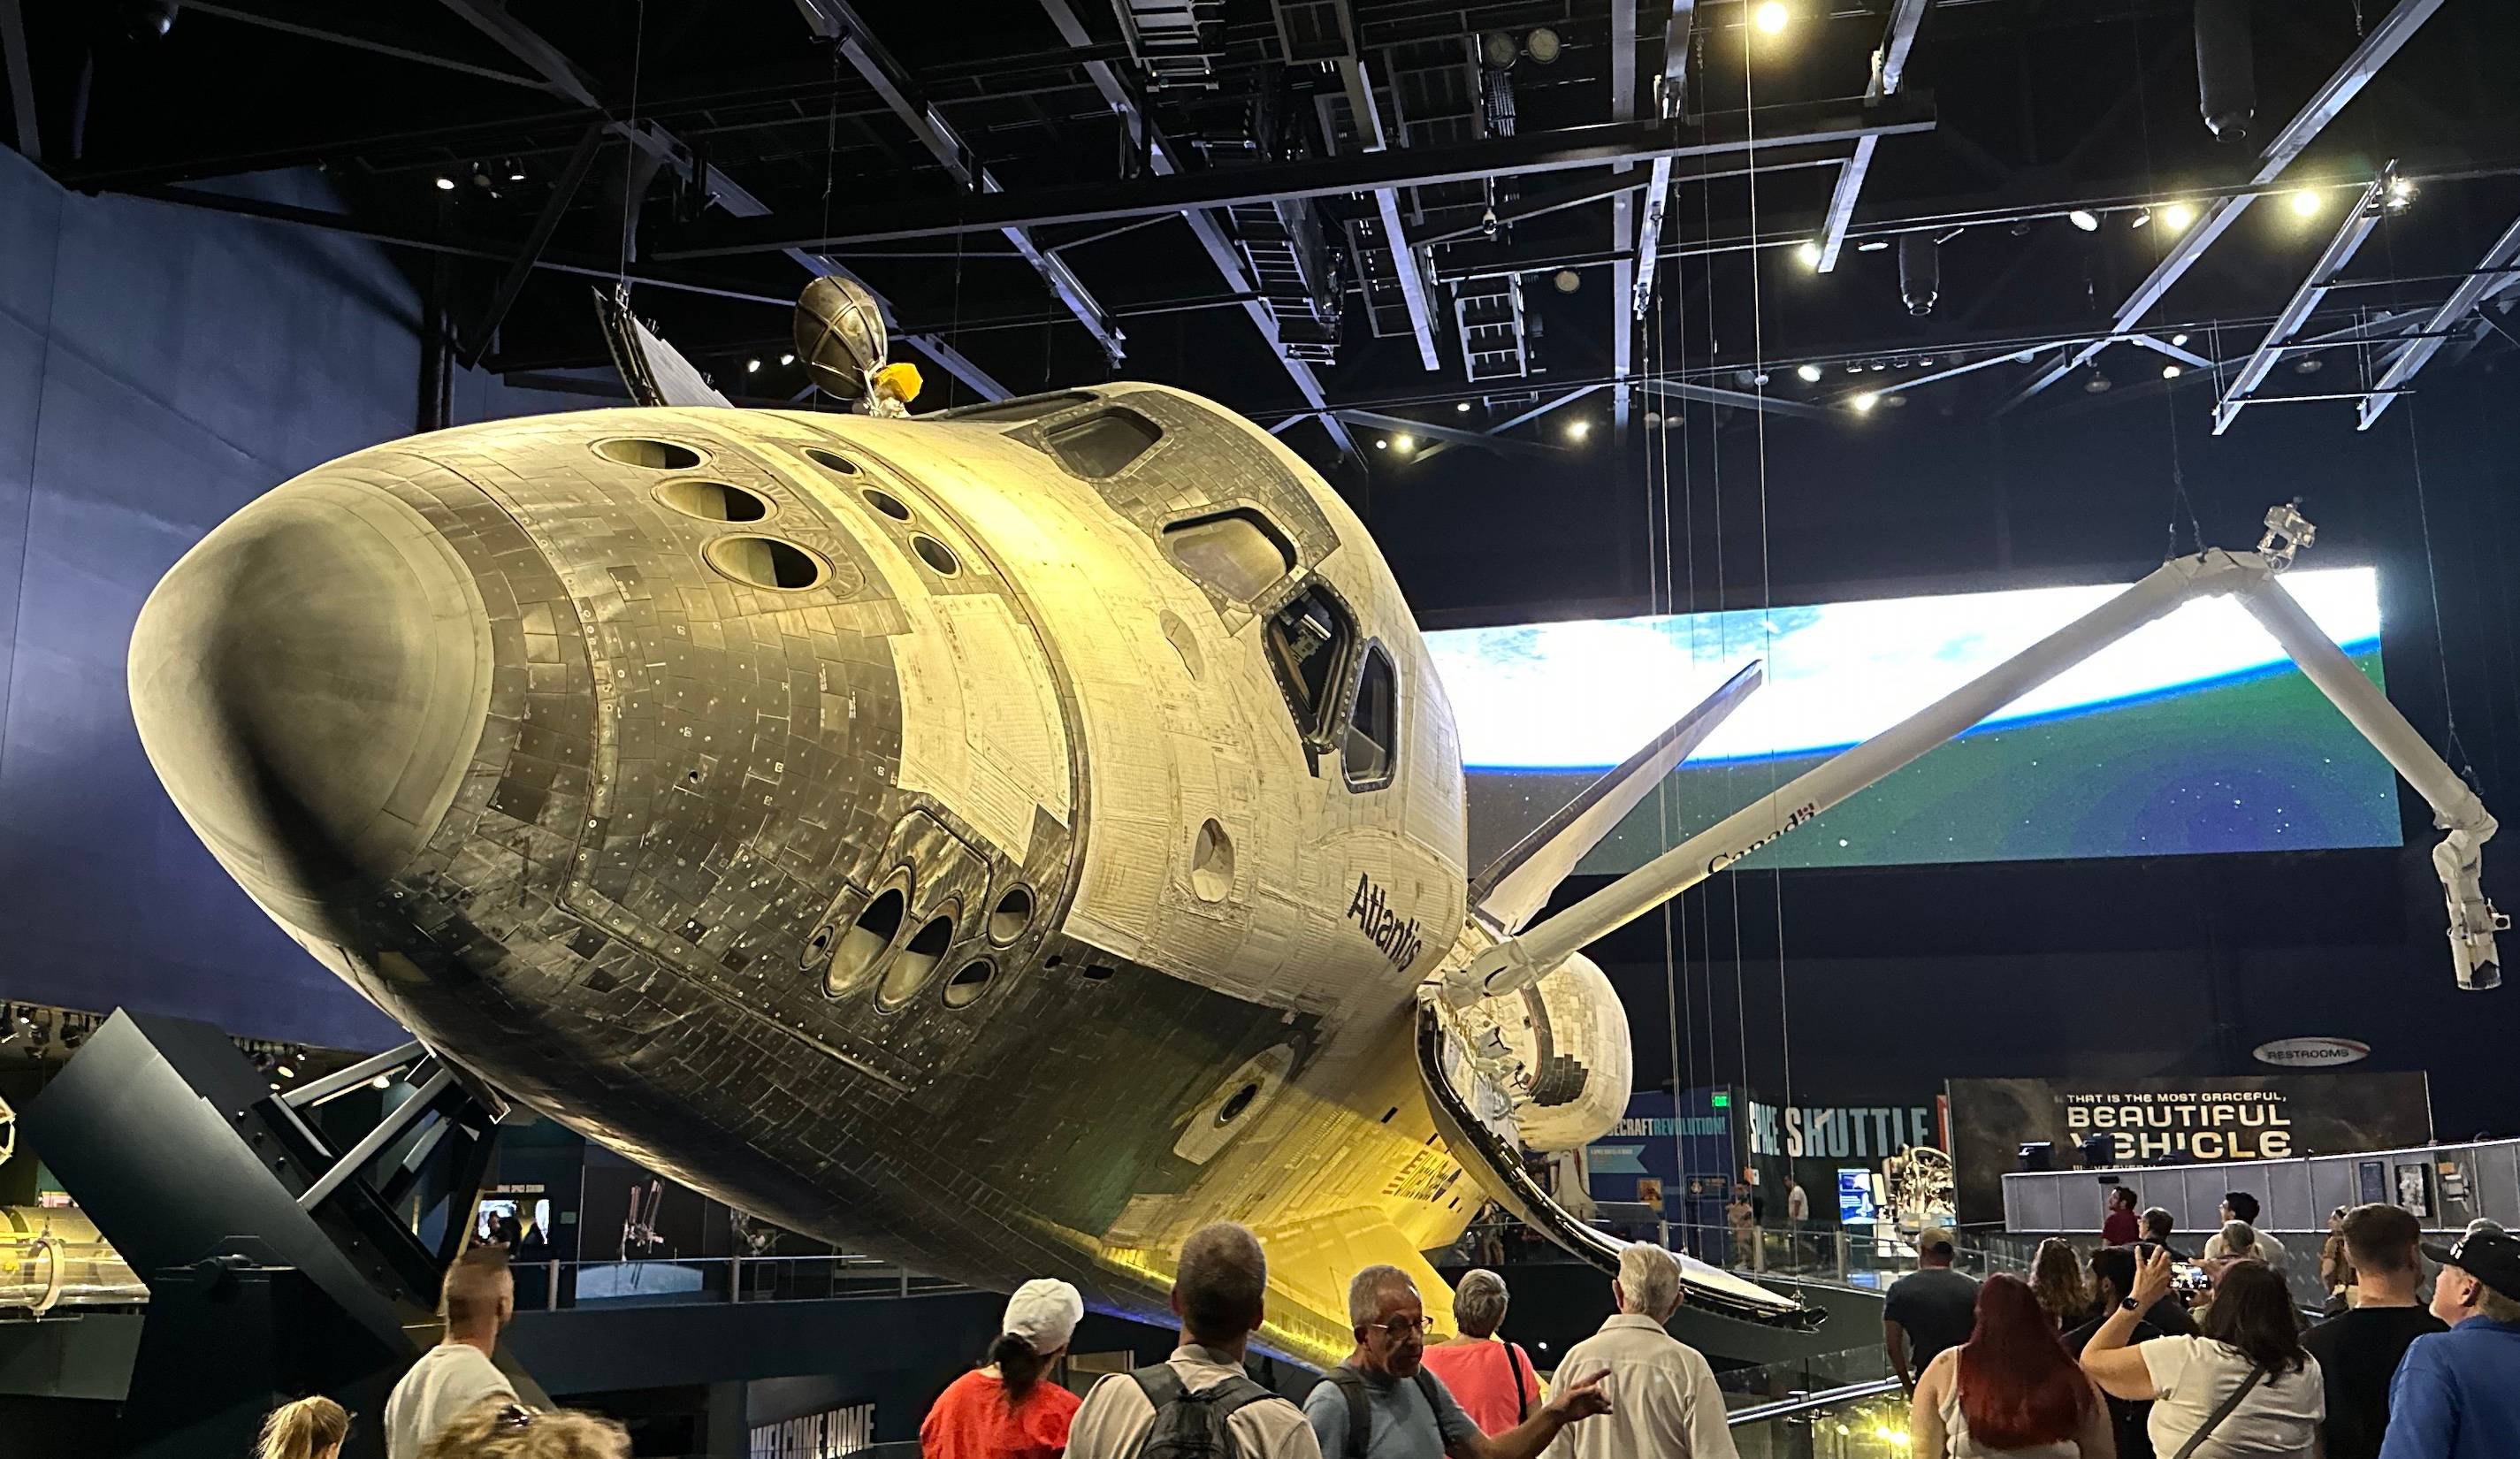 Space Shuttle Atlantis® at Kennedy Space Center Visitor Complex